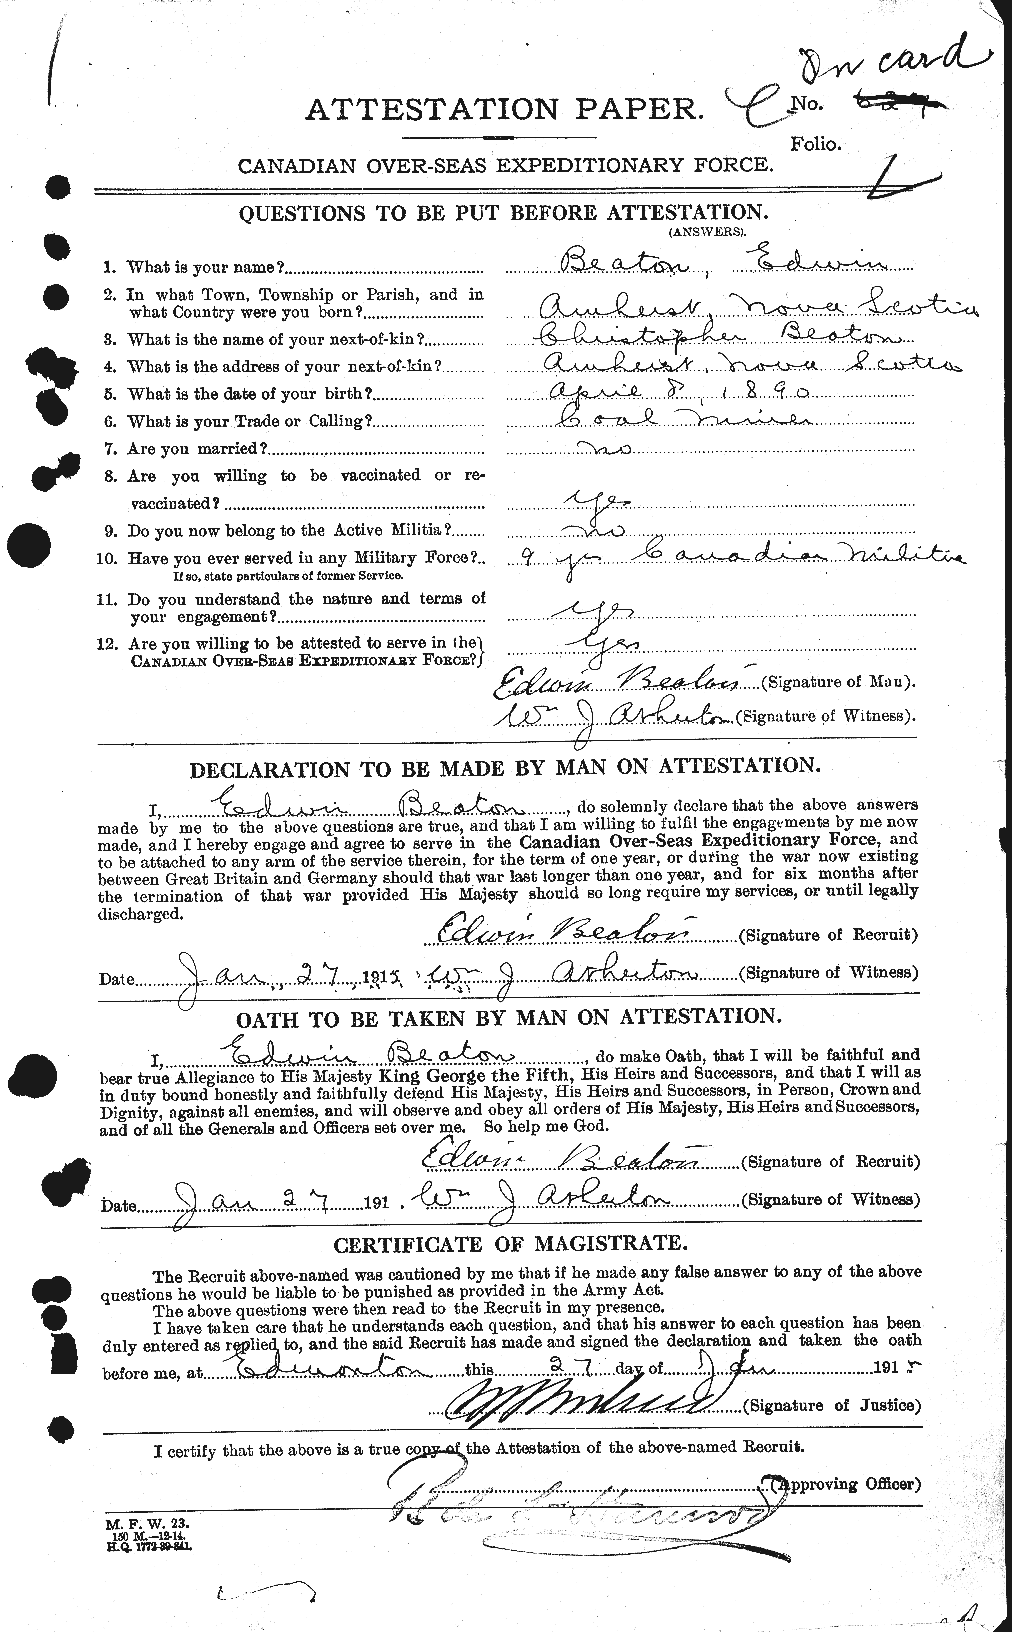 Personnel Records of the First World War - CEF 230496a